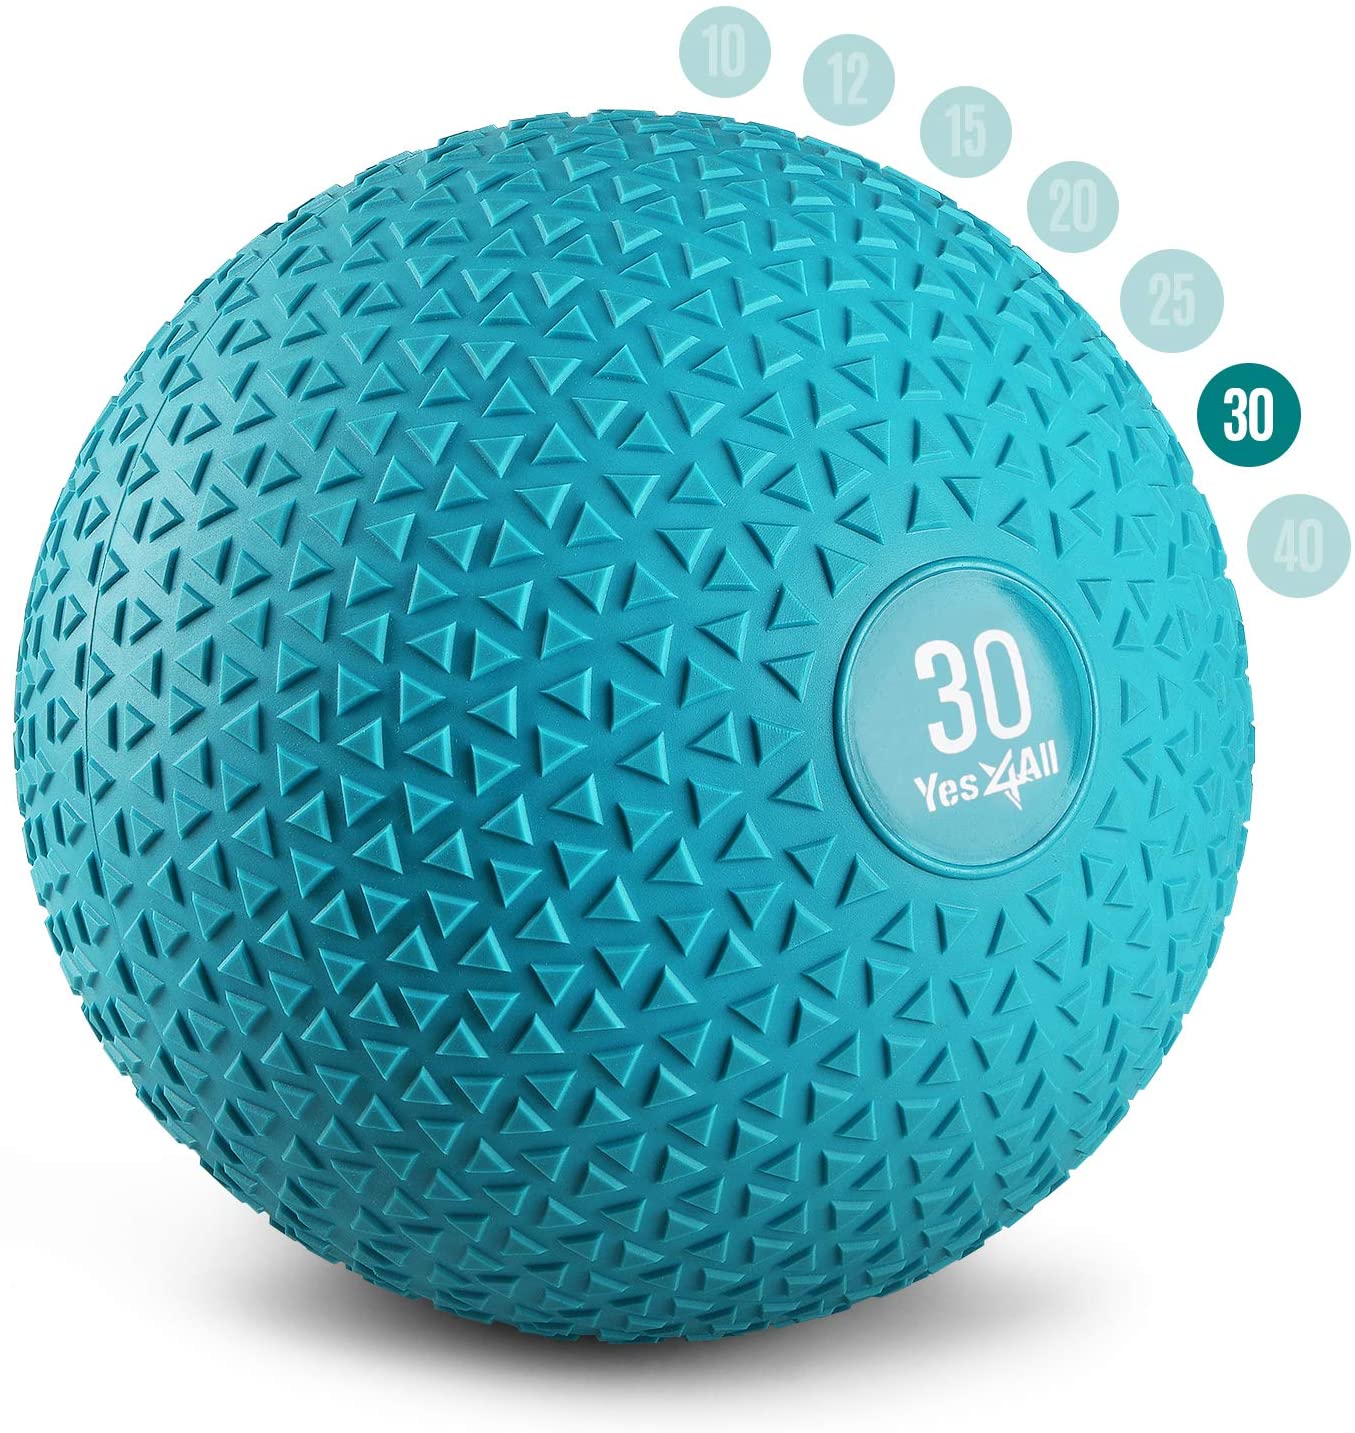 Yes4All 30lbs Slam Medicine Ball Triangle Teal - image 1 of 8